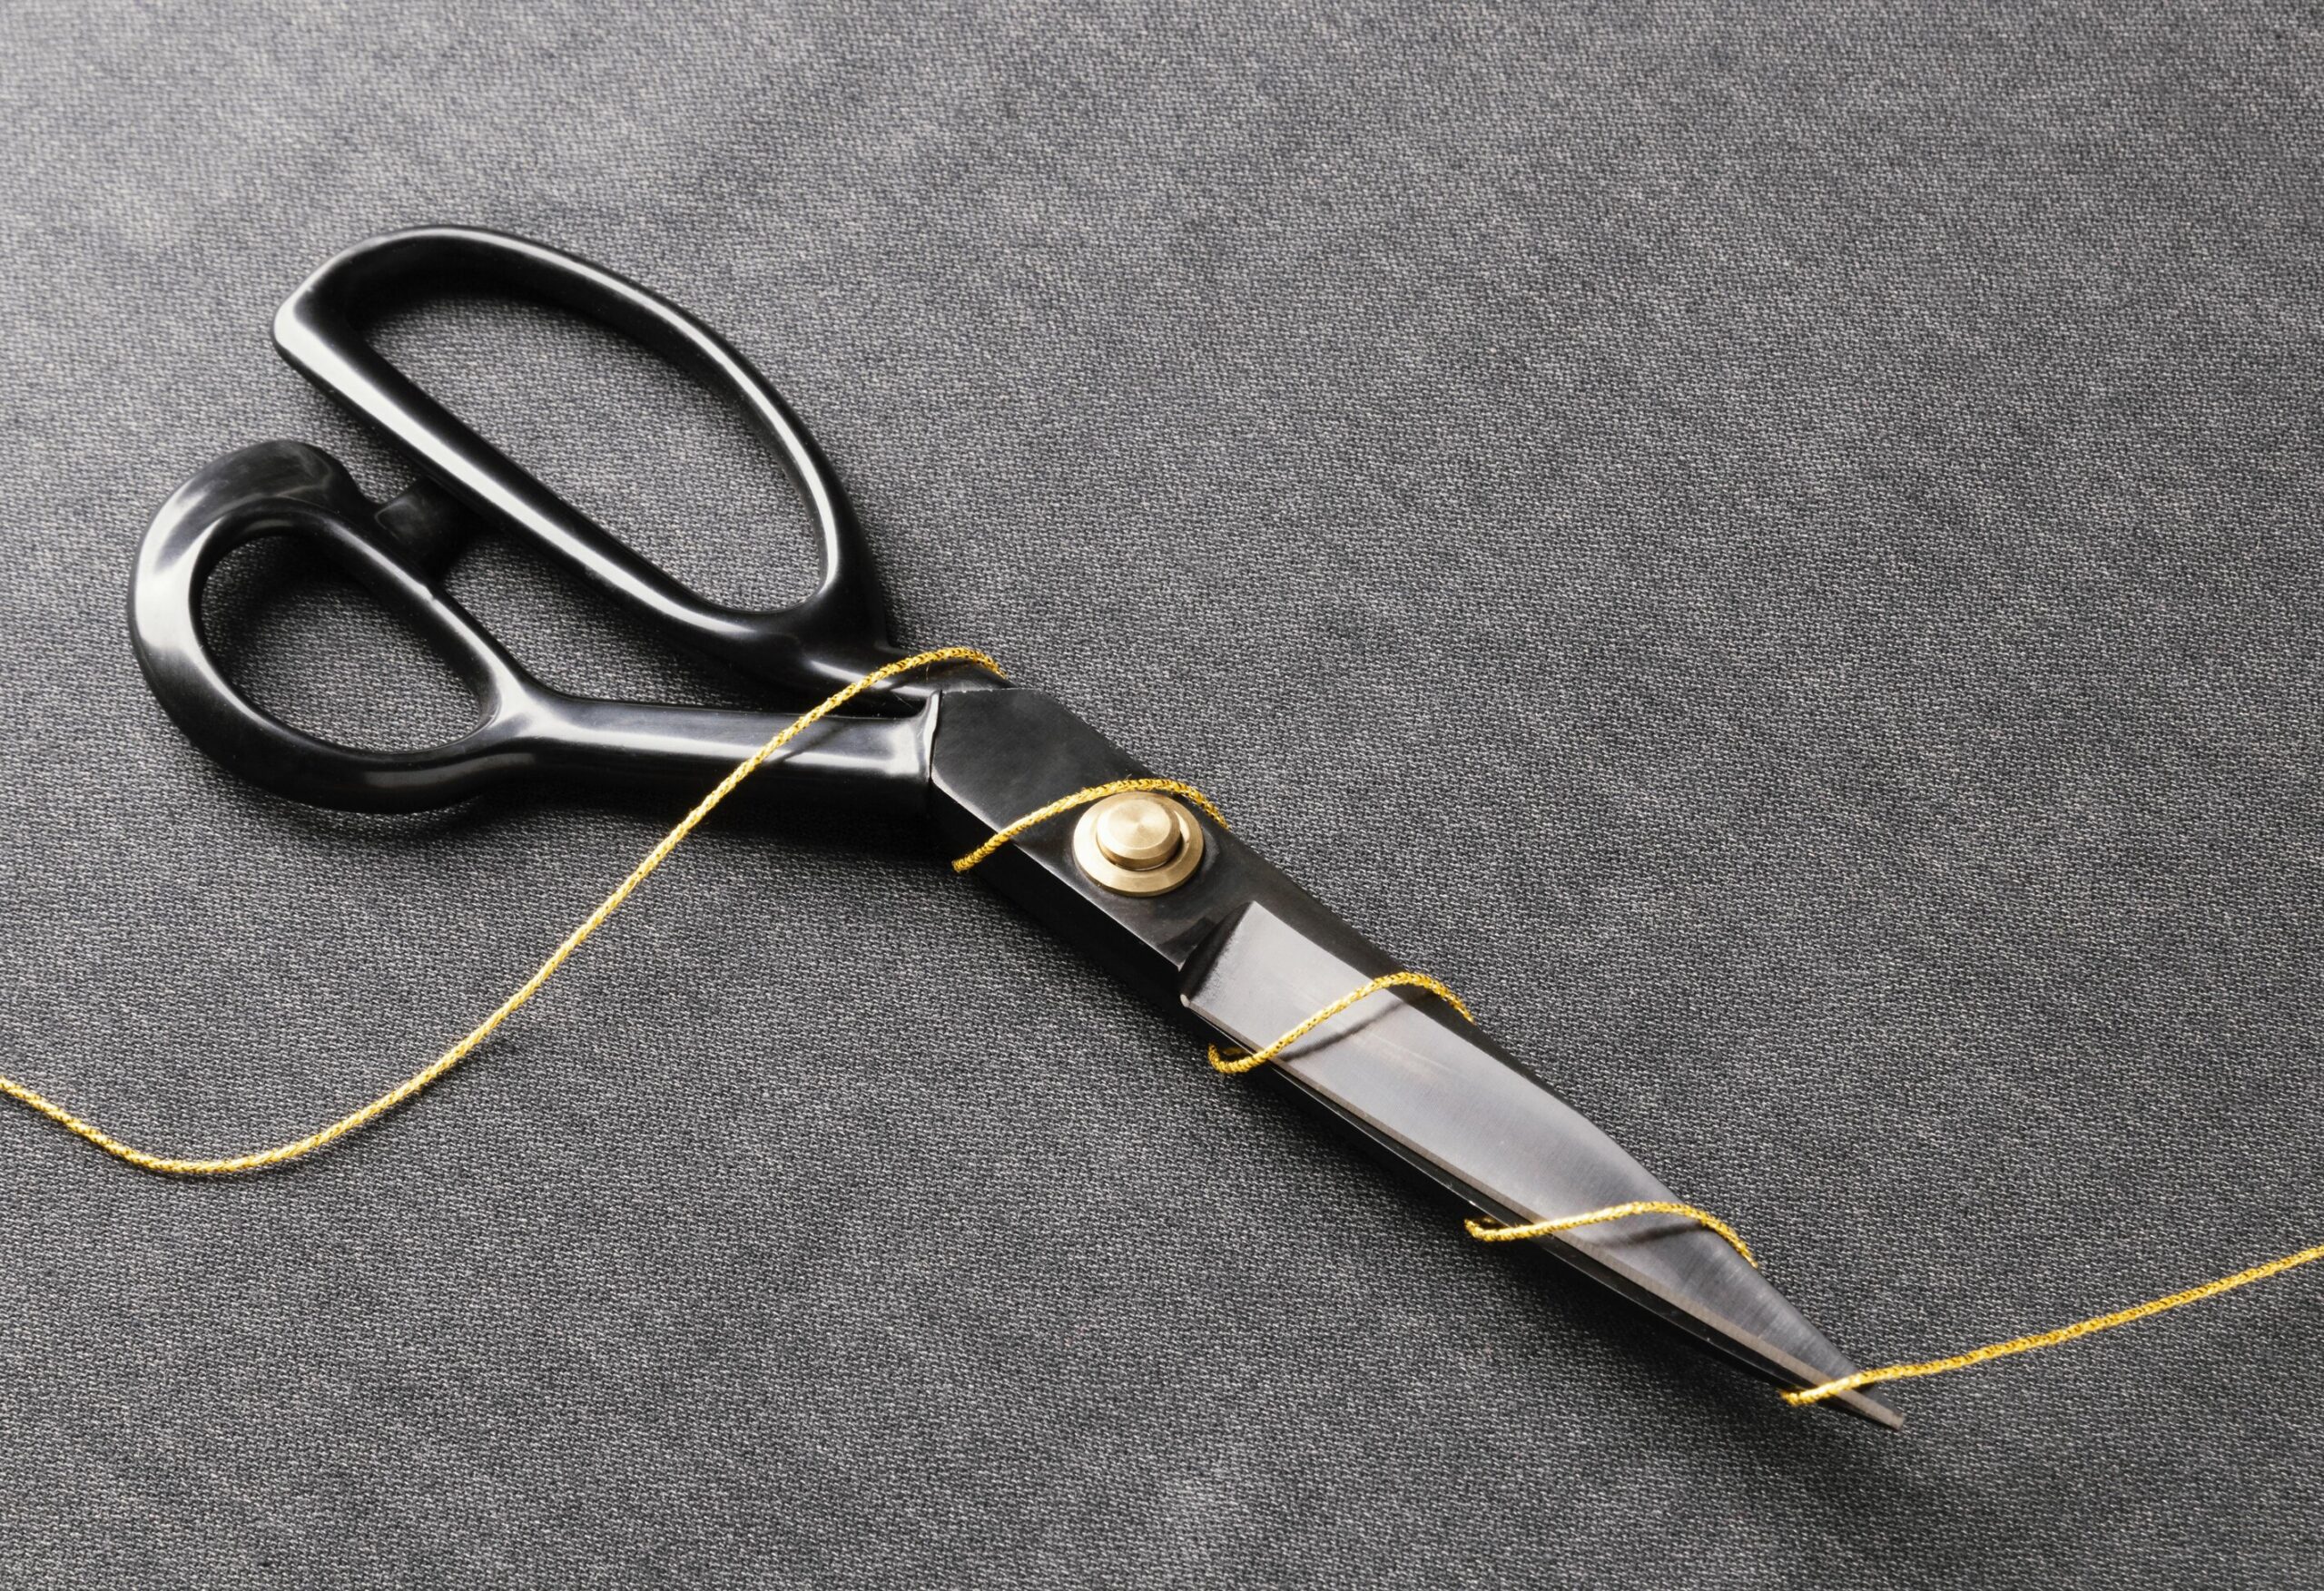 Best Embroidery Scissors Every Sewist Should Have